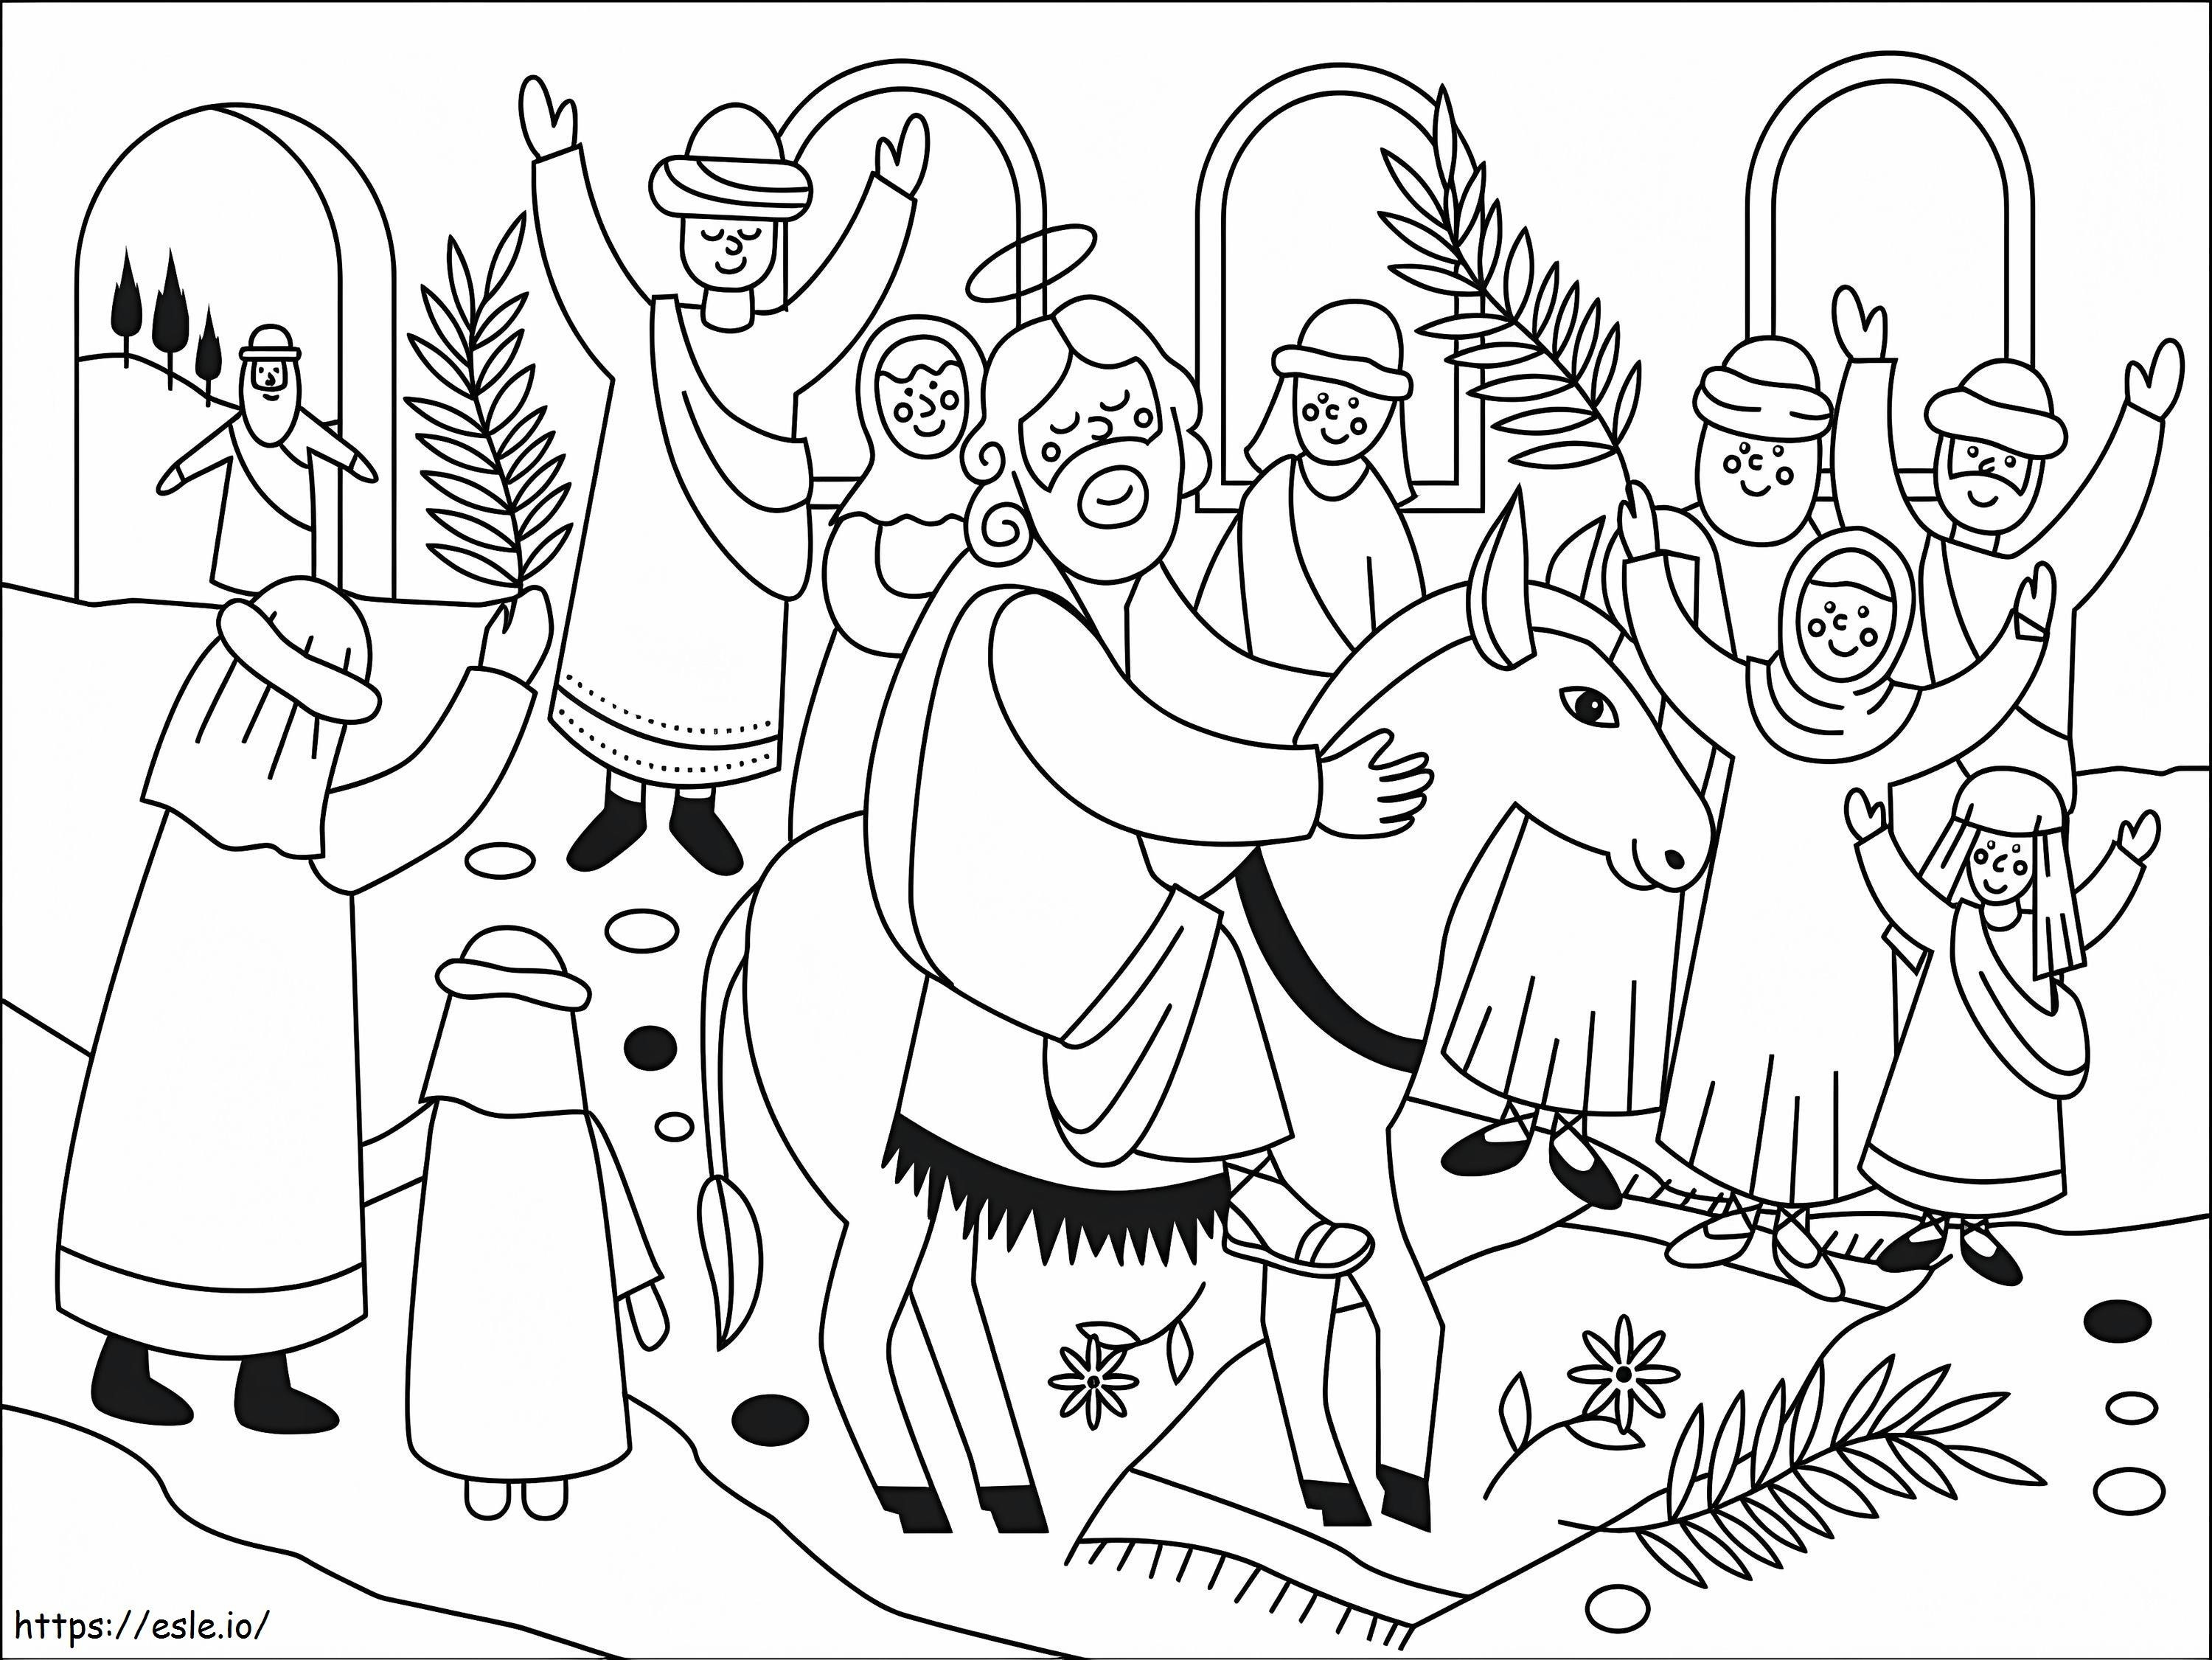 Palm Sunday 7 coloring page